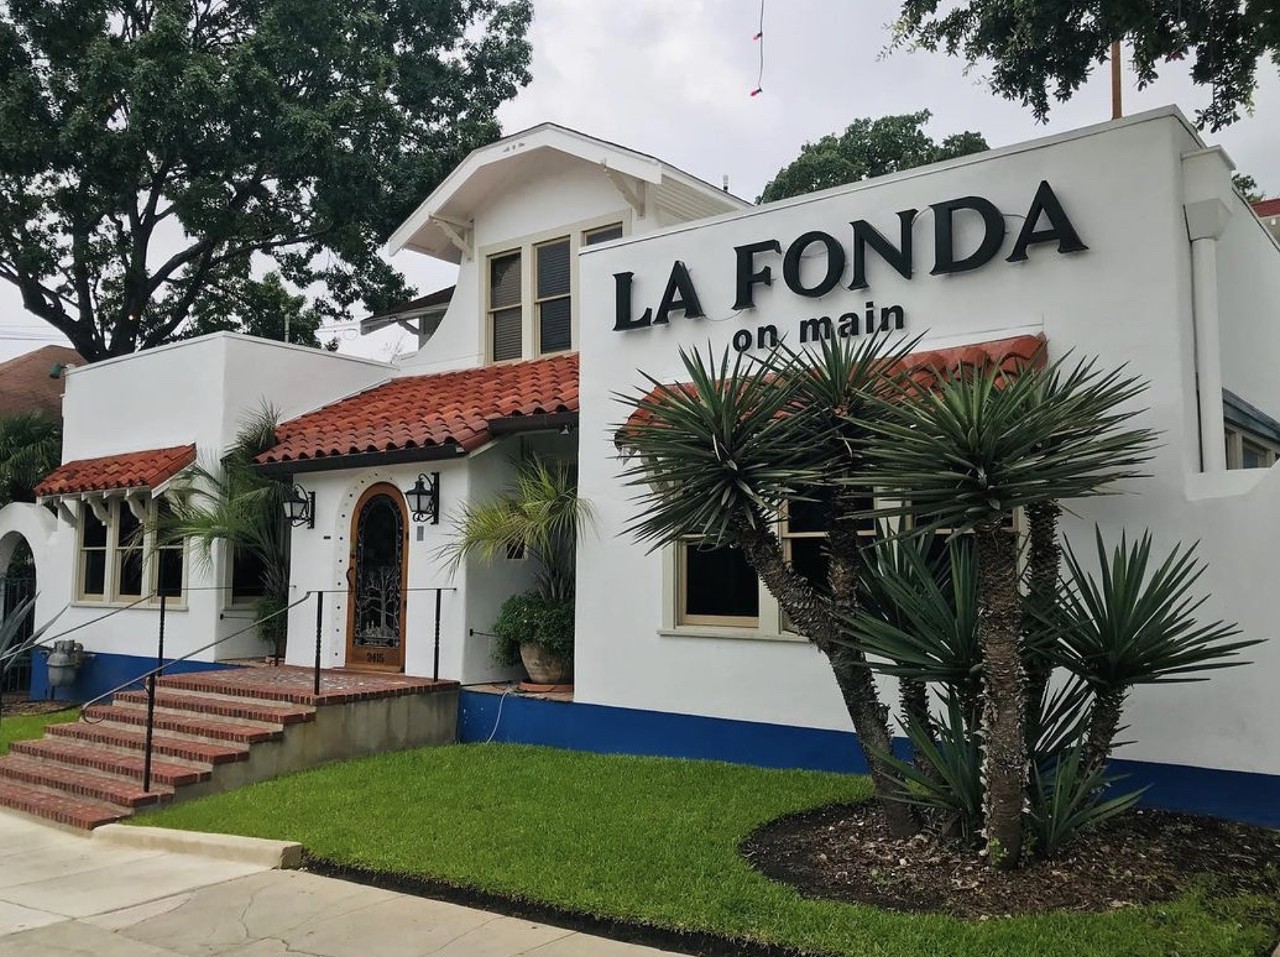 La Fonda on Main
2415 N. Main Ave., (210) 733-0621, lafondaonmain.com
A classic for Tex-Mex and Mexican fare since 1932, the longstanding La Fonda on Main should be on every couple's date night bucket list. The shaded patio is the perfect spot to sip margaritas together.